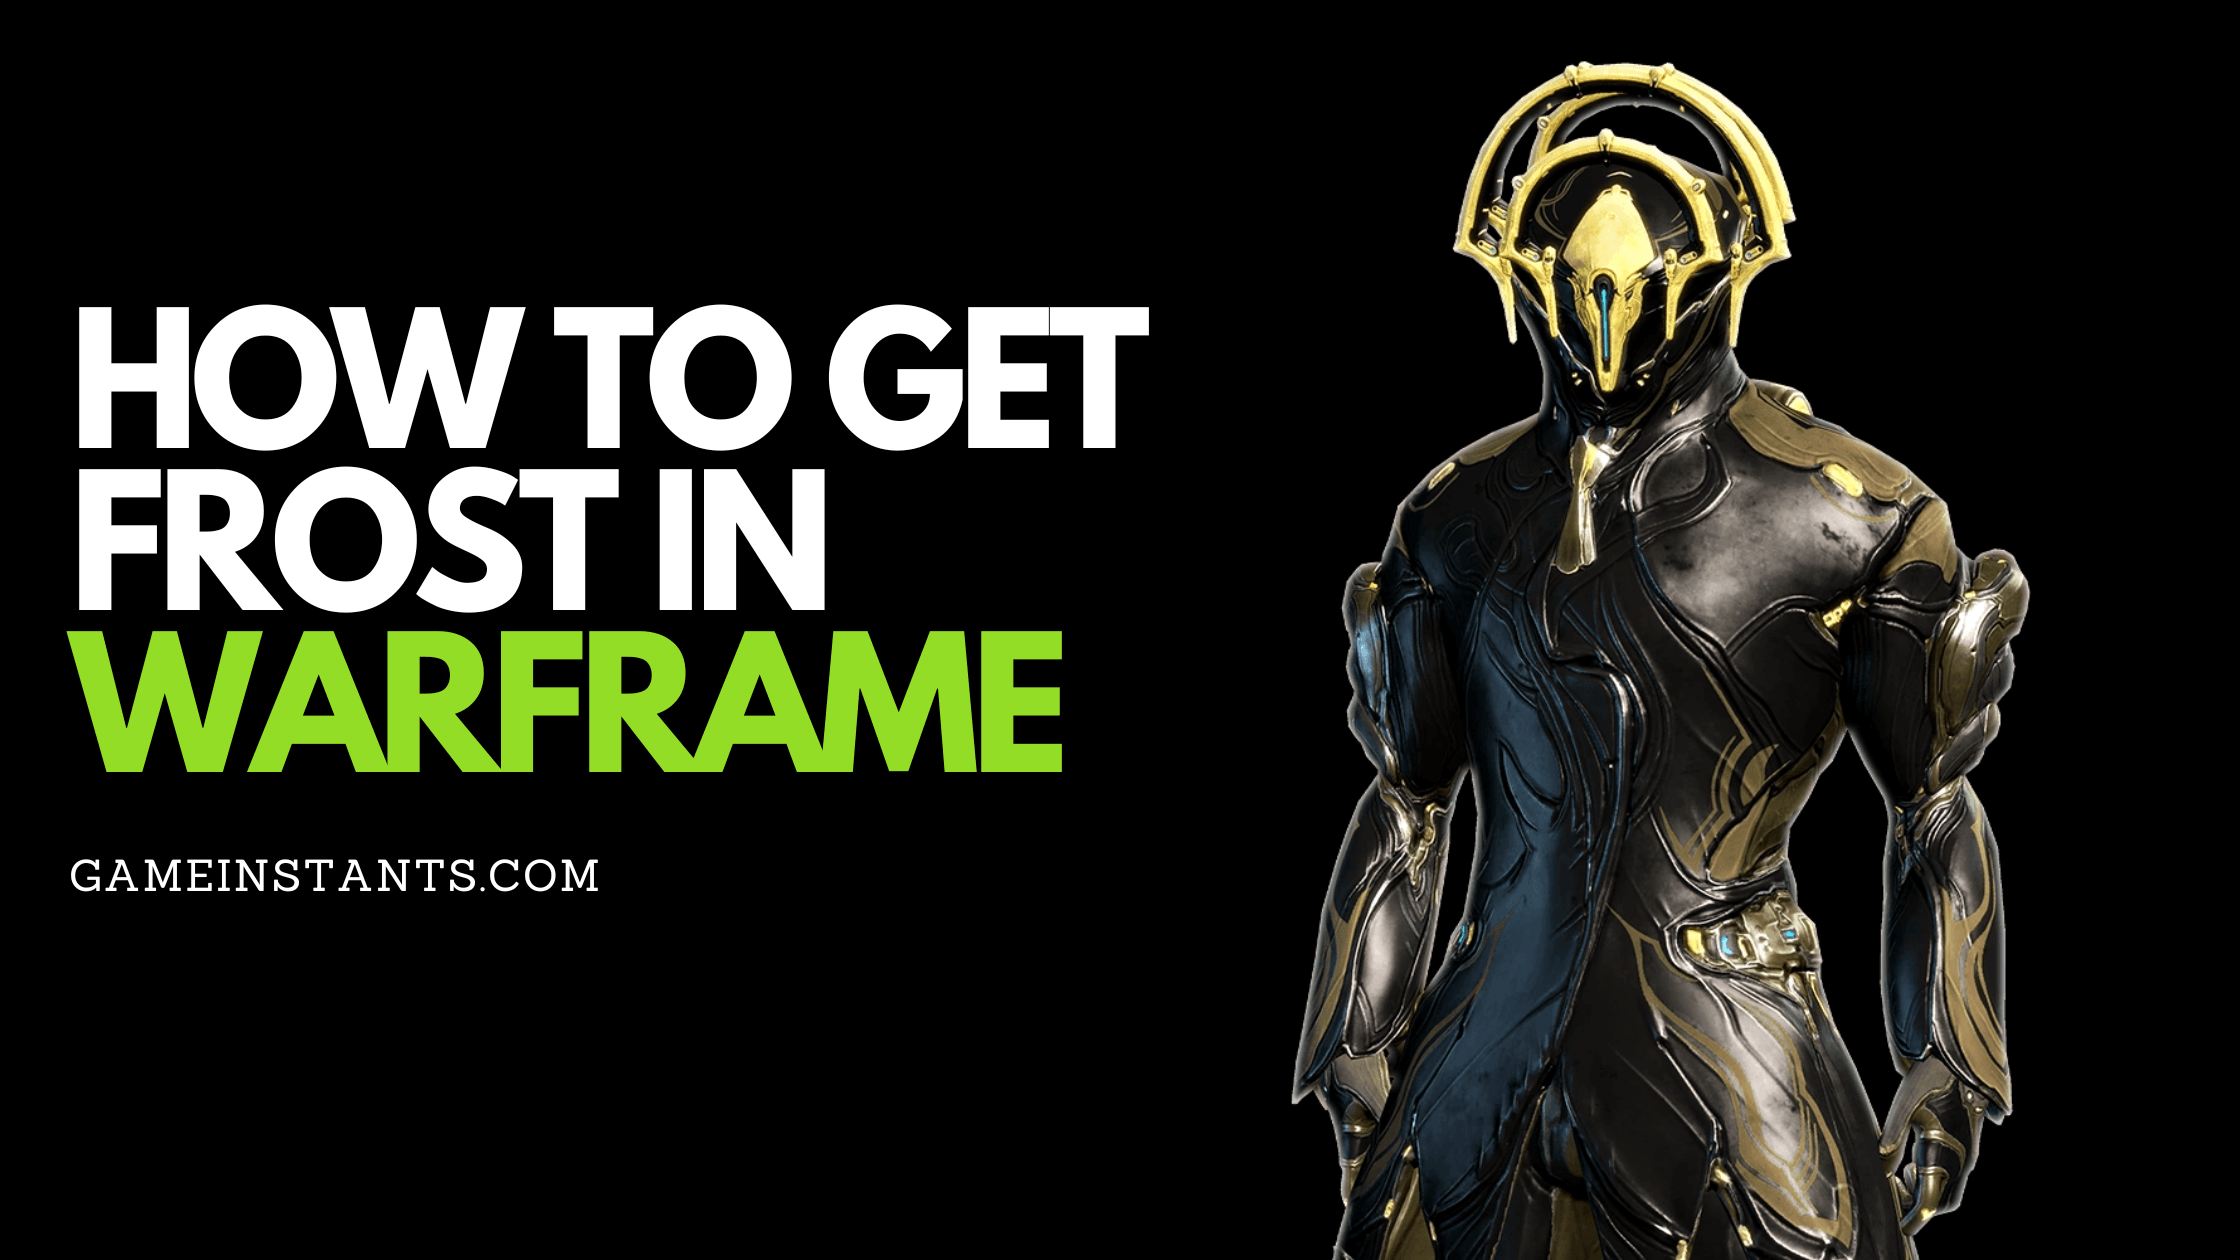 How To Get Frost in Warframe